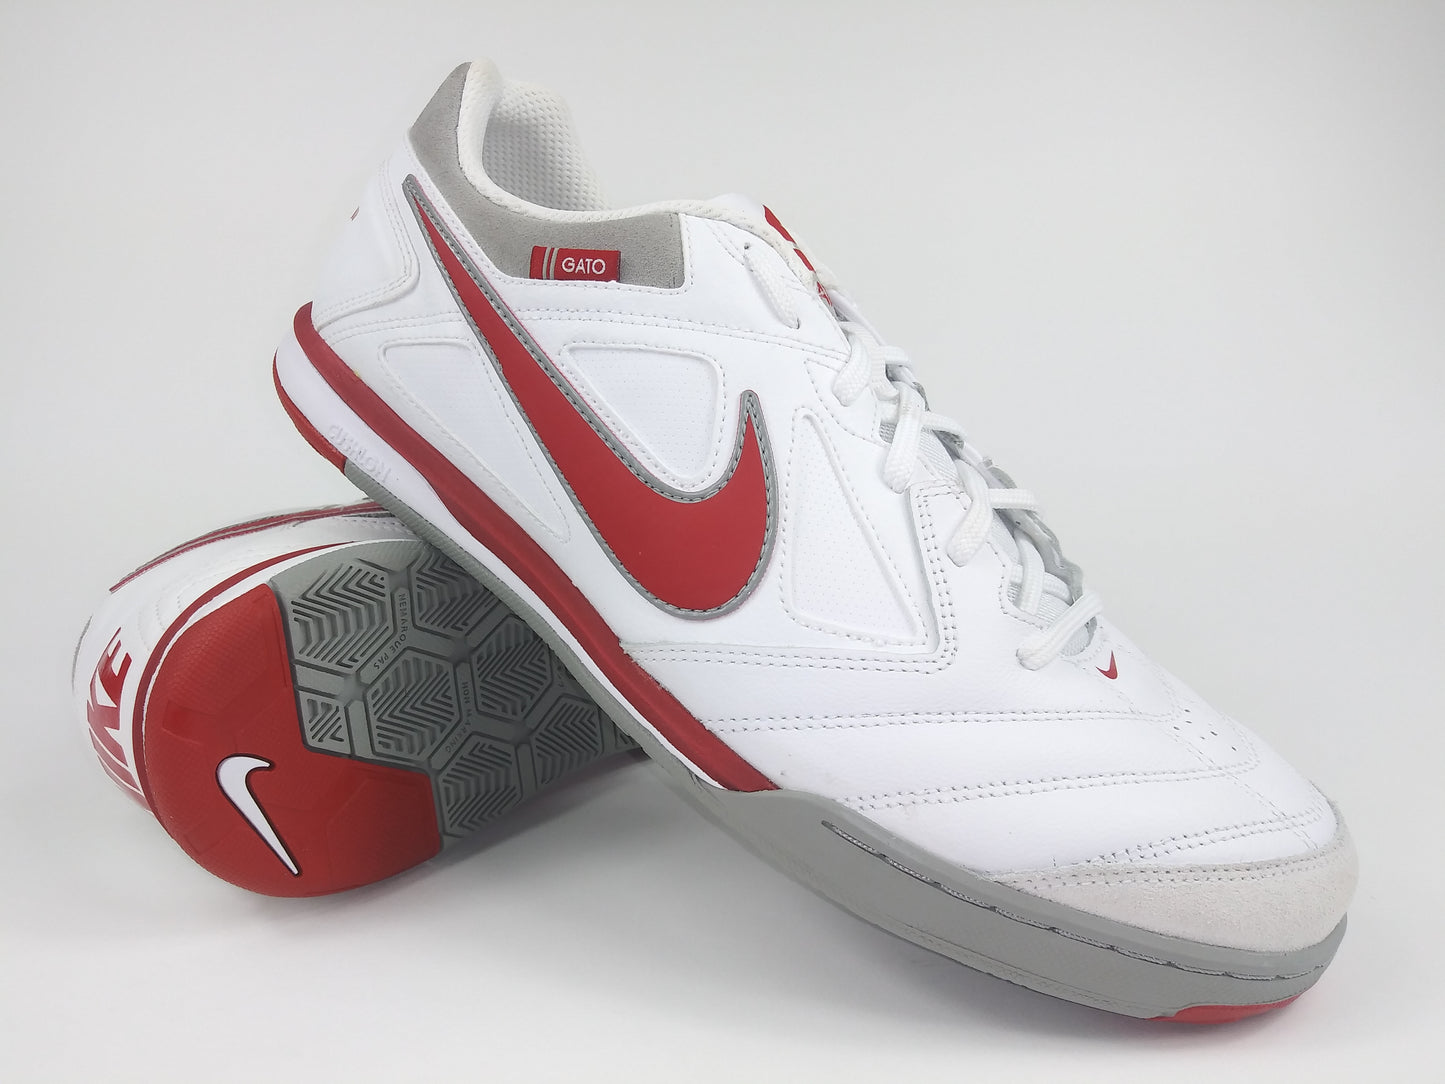 Nike5 Gato LTR Indoor Shoes White Red – Footwear